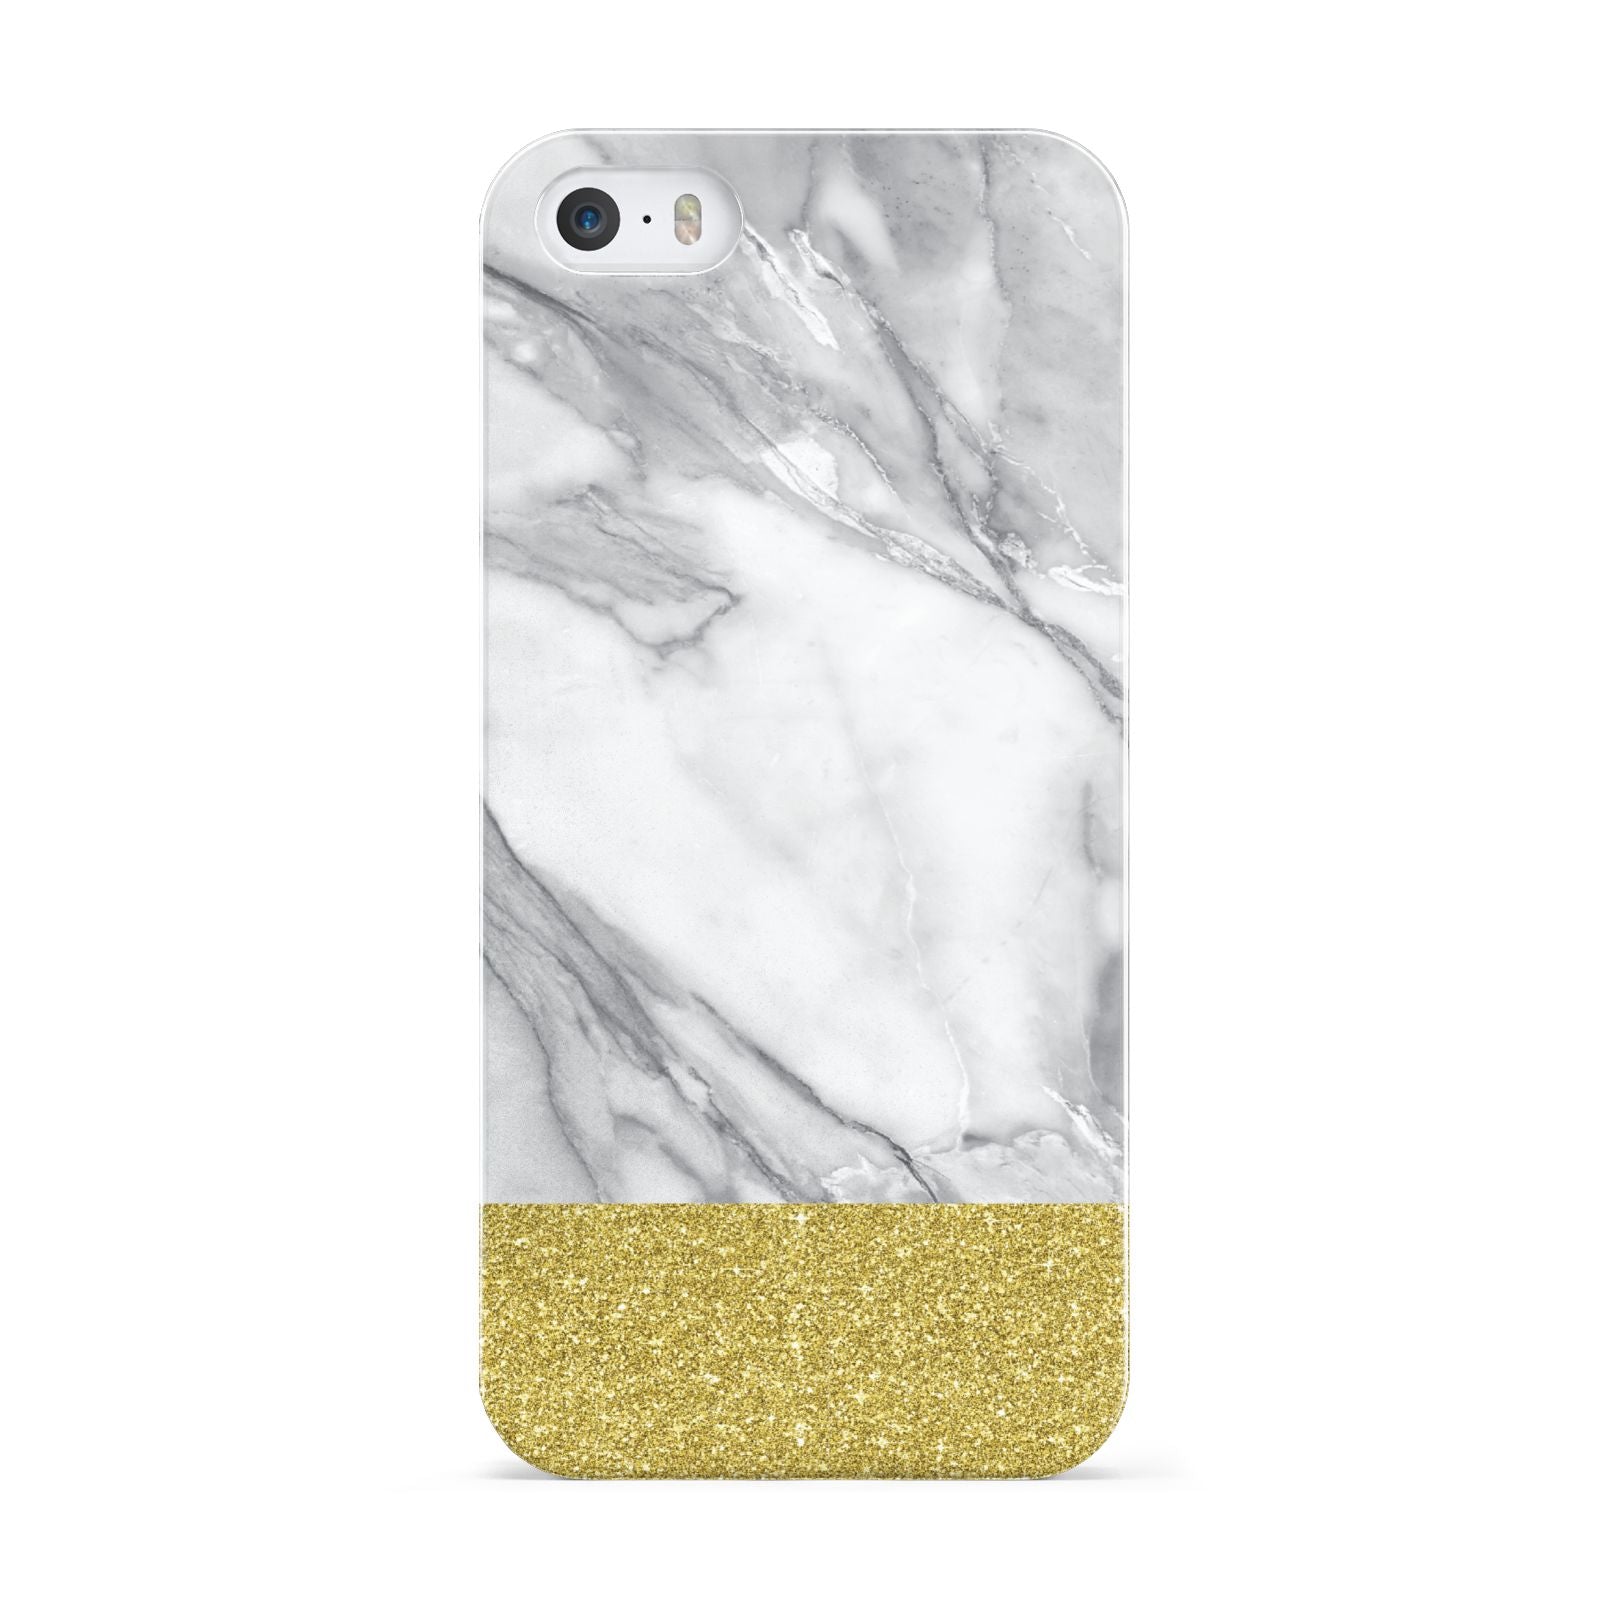 Marble Grey White Gold Apple iPhone 5 Case